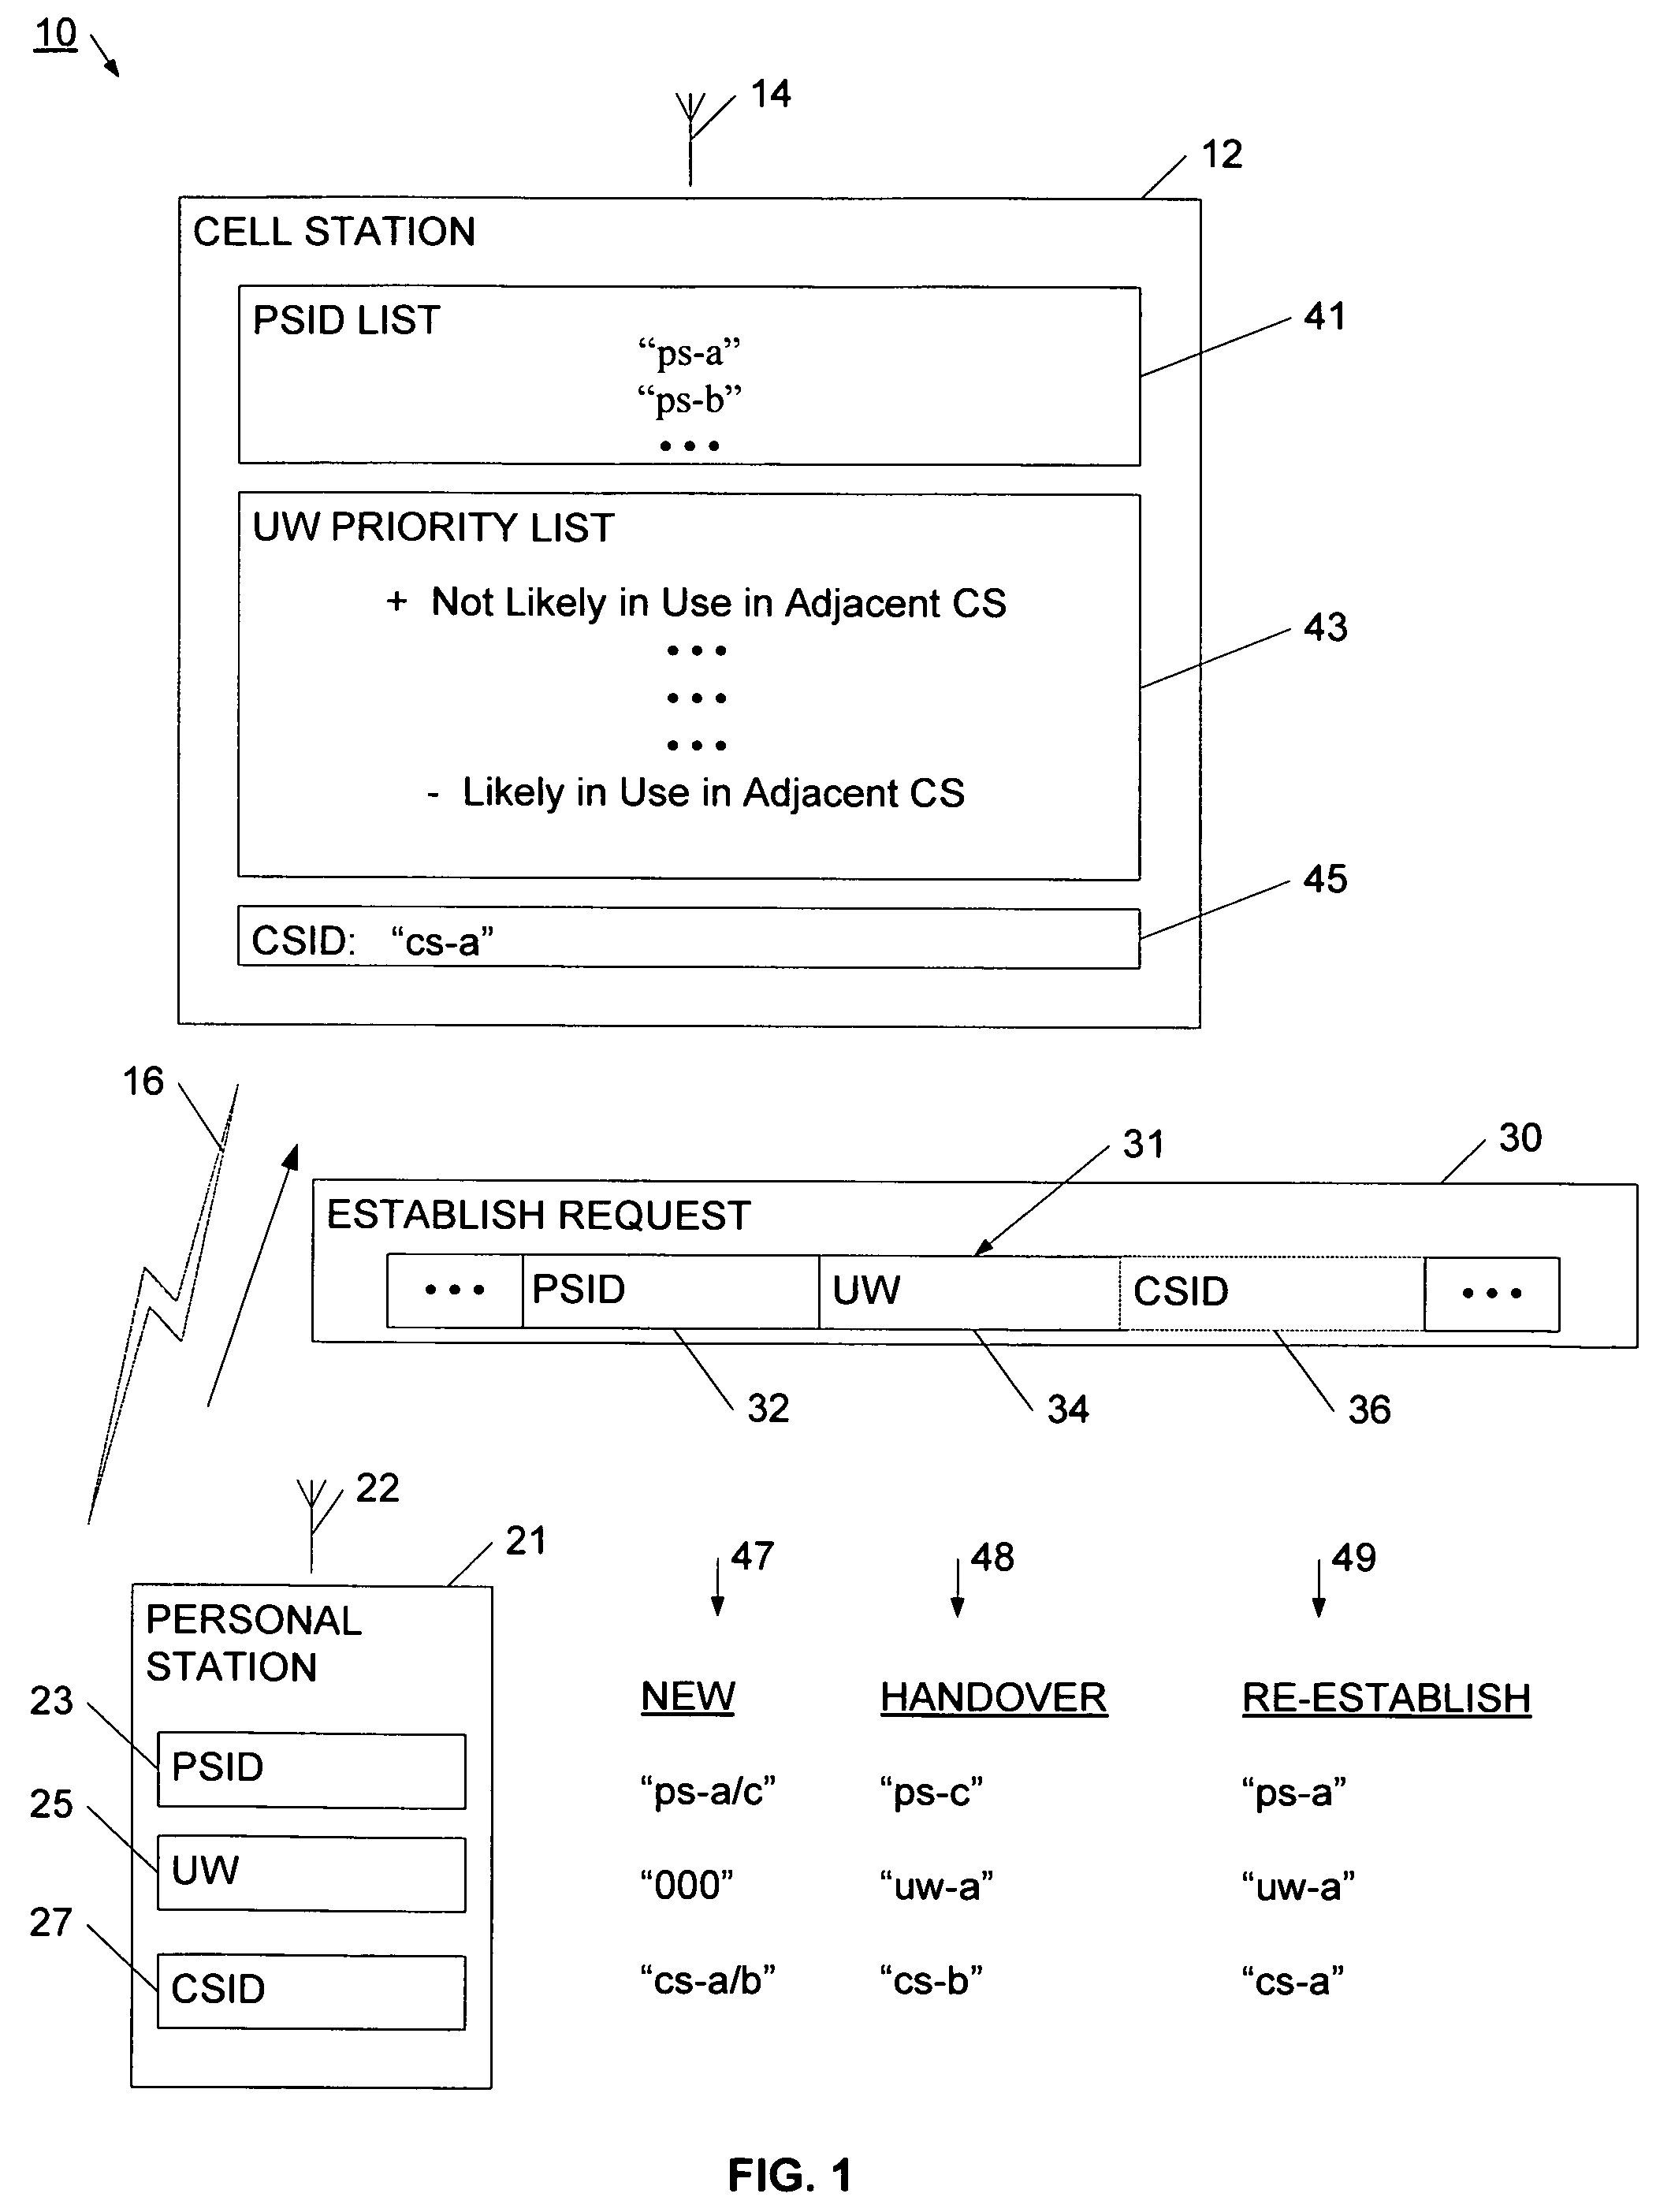 Method for assigning a unique word in a communication system